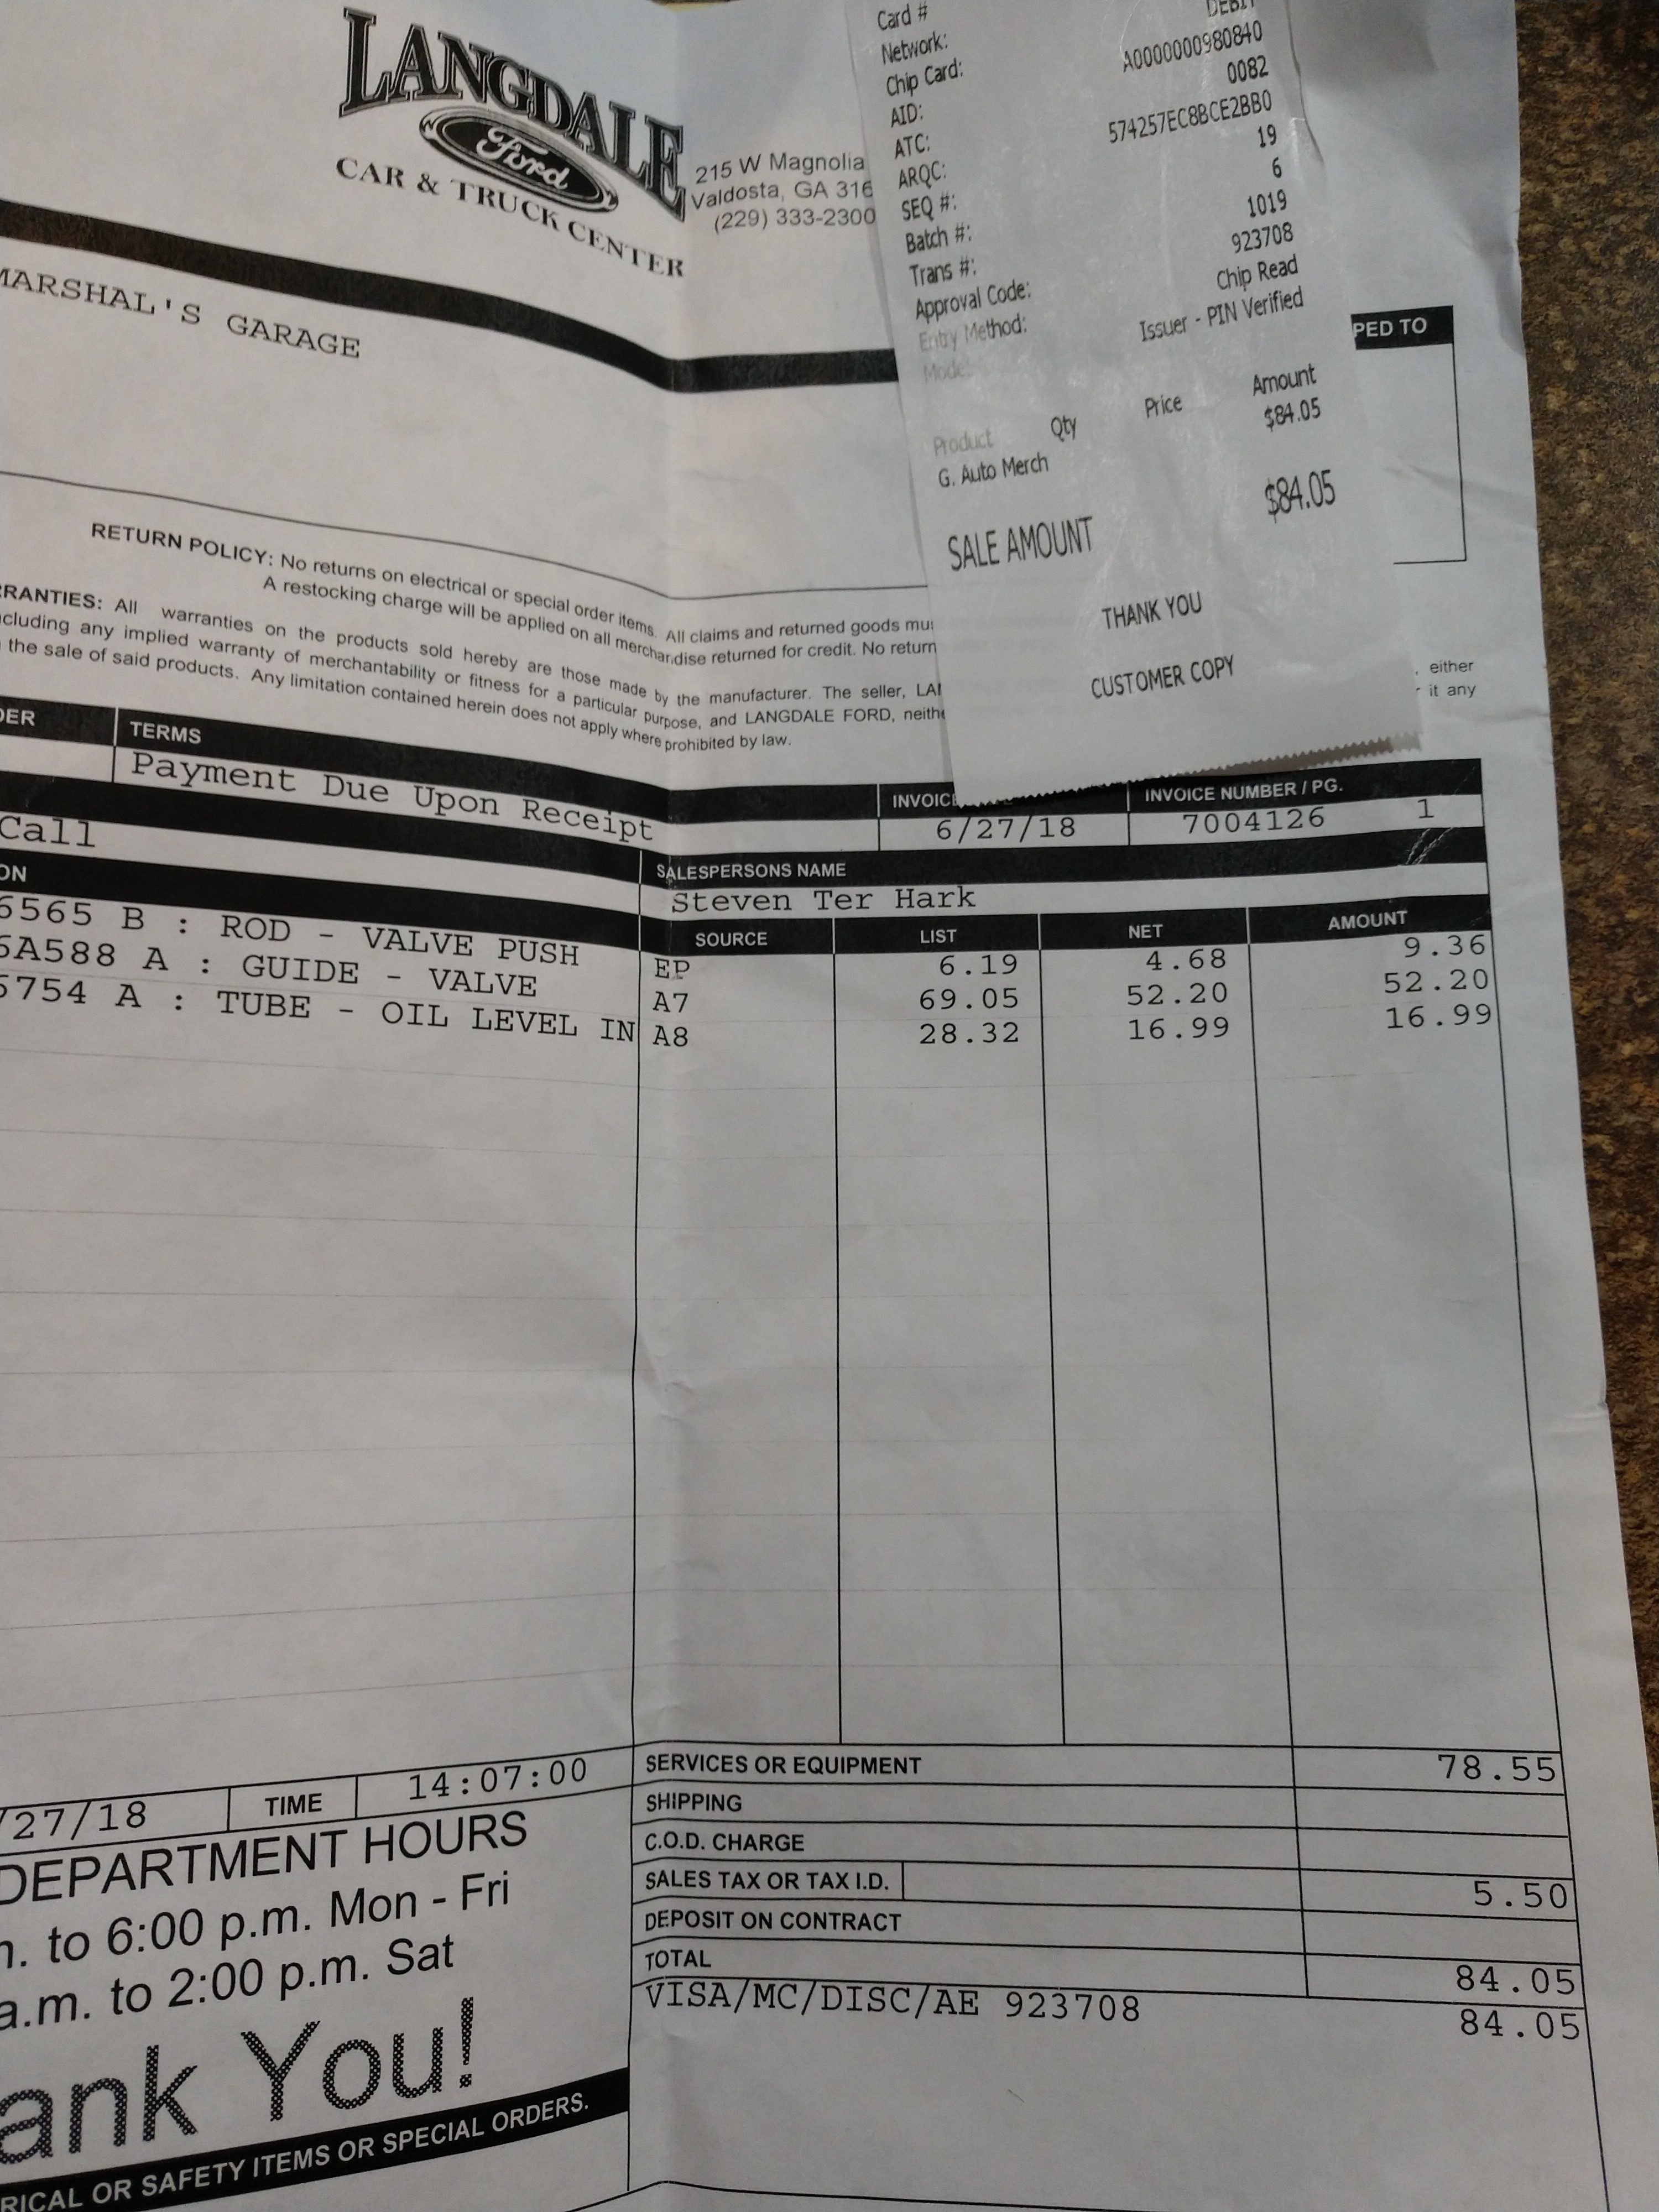 First invoice for broken parts